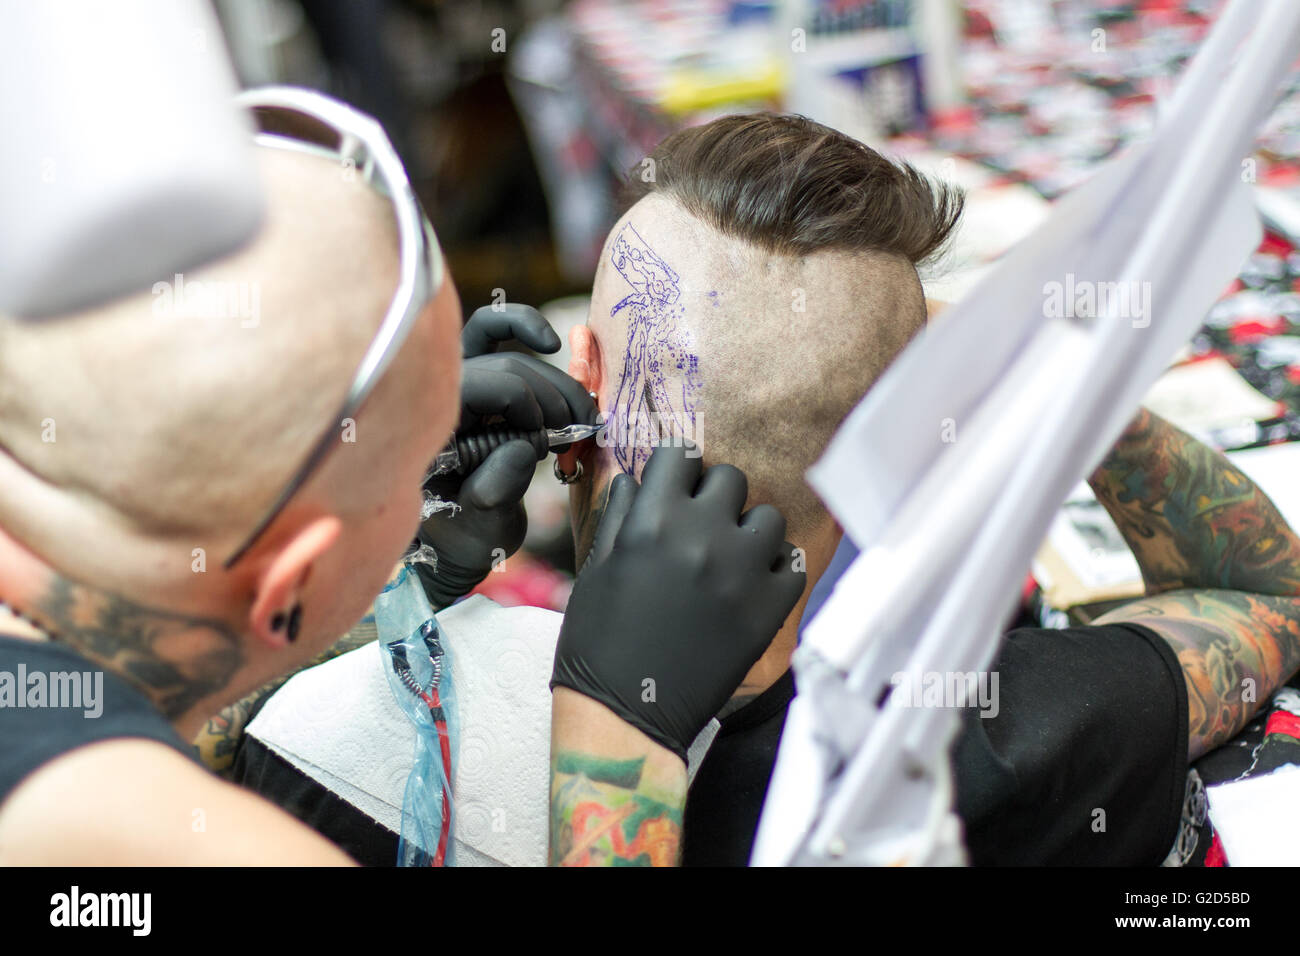 London, UK  28th May, 2016. The Great British Tattoo Show at  Alexandra Palace, London, UK. The show features over 320 tattoo artists as well as alternative fashion shows and stage acts. A Tattoo artist at work. Copyright Carol Moir/Alamy Live News. Stock Photo